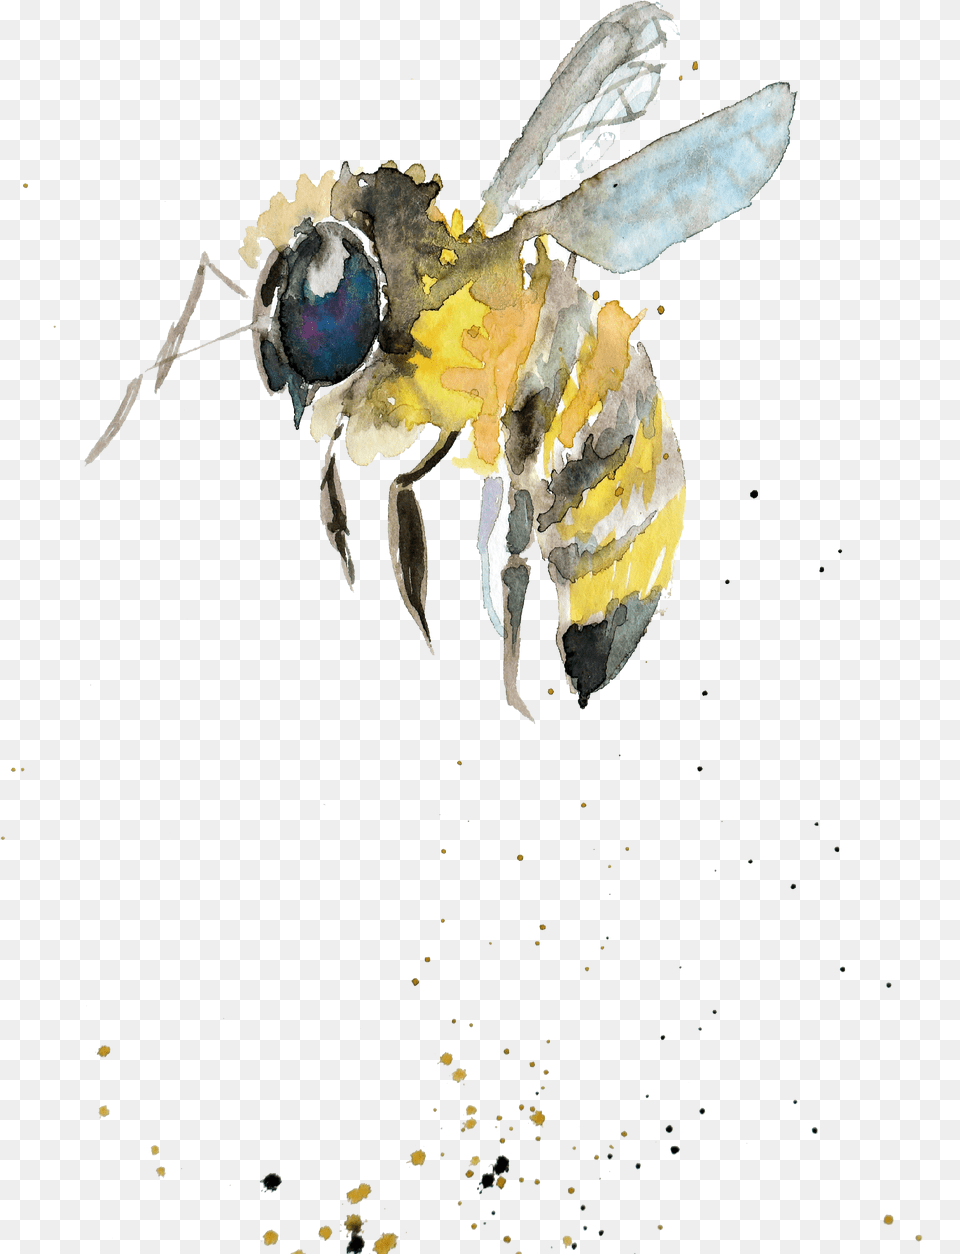 Bumblebee Watercolor Painting Drawing Insect Gift Watercolor Bee Transparent Background, Animal, Invertebrate, Wasp, Apidae Png